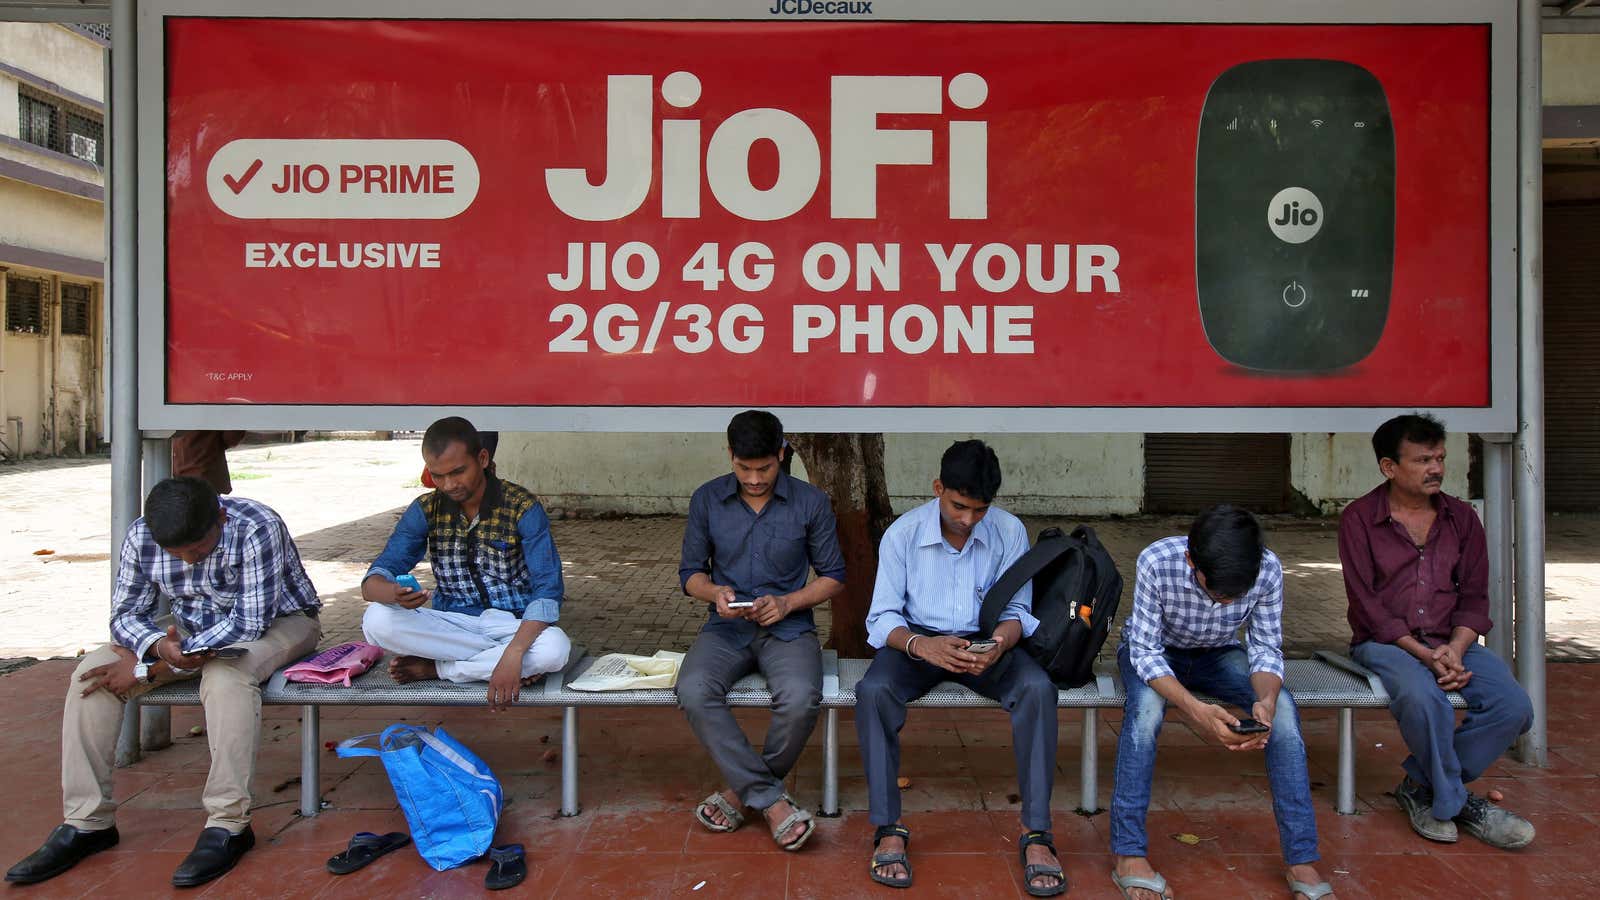 Jio beta! Cheap data is fuelling a porn boom in India